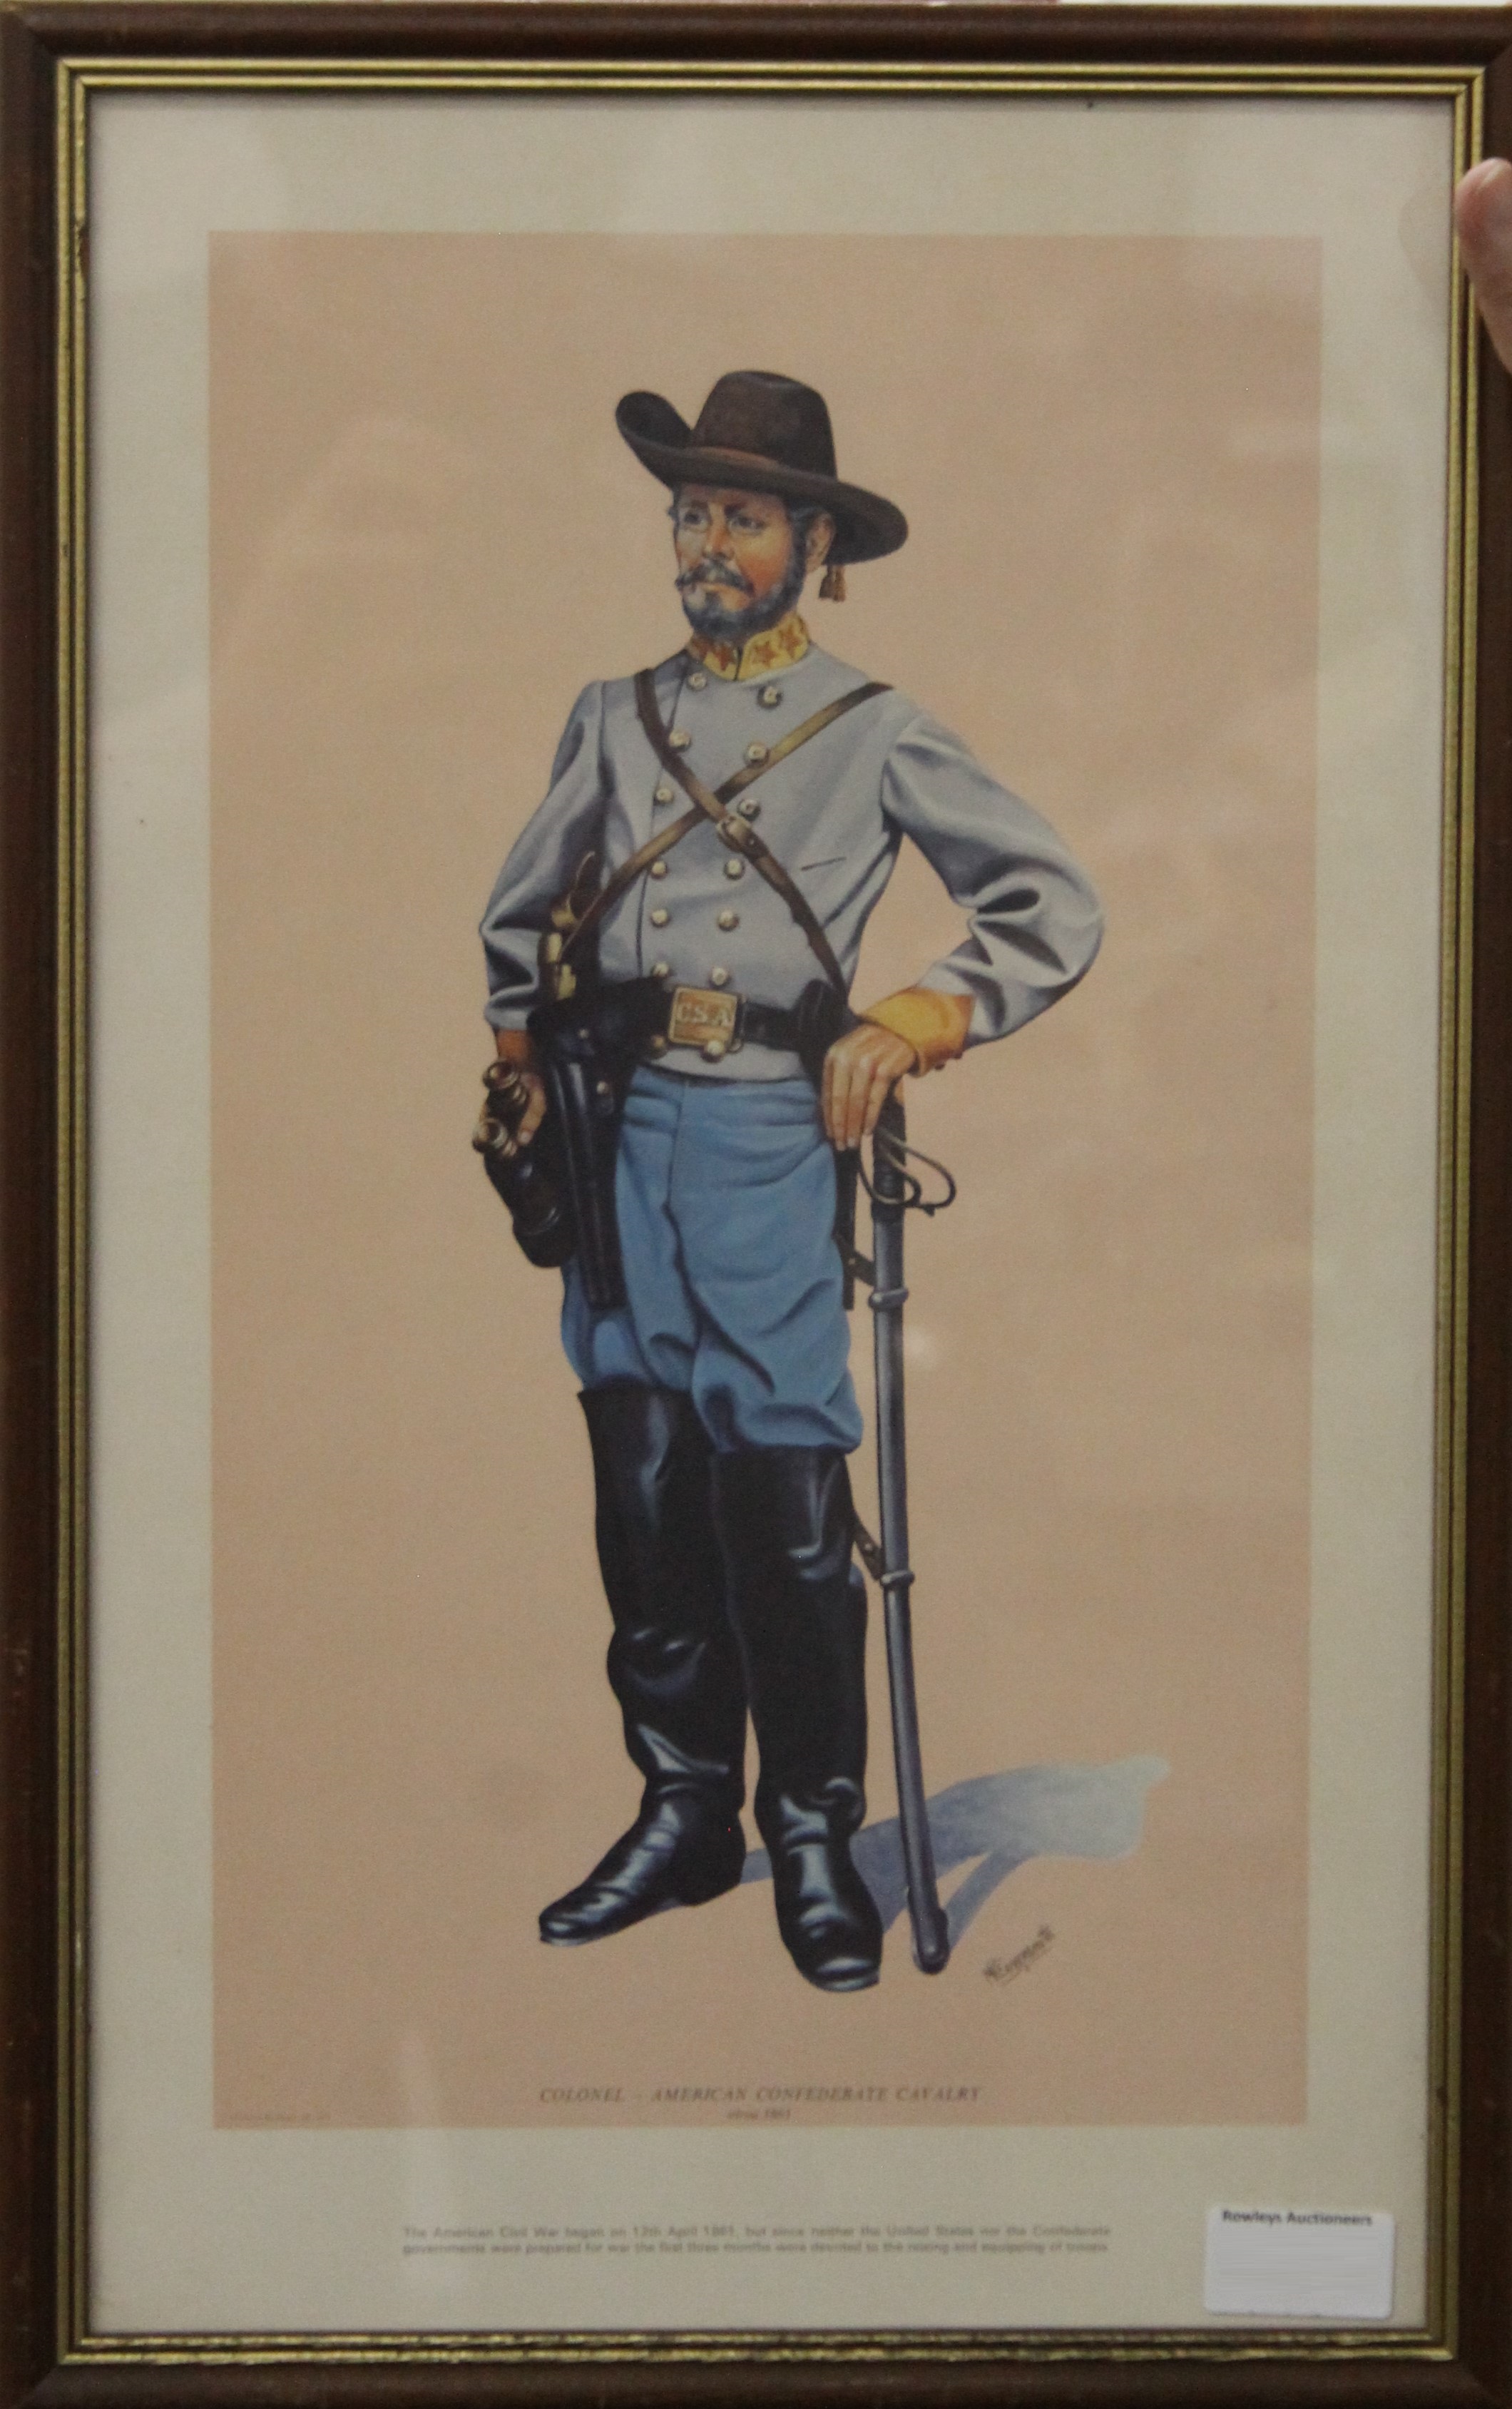 Confederate Colonel print by M Greensmith, framed and glazed. 27 x 45 cm. - Image 2 of 2